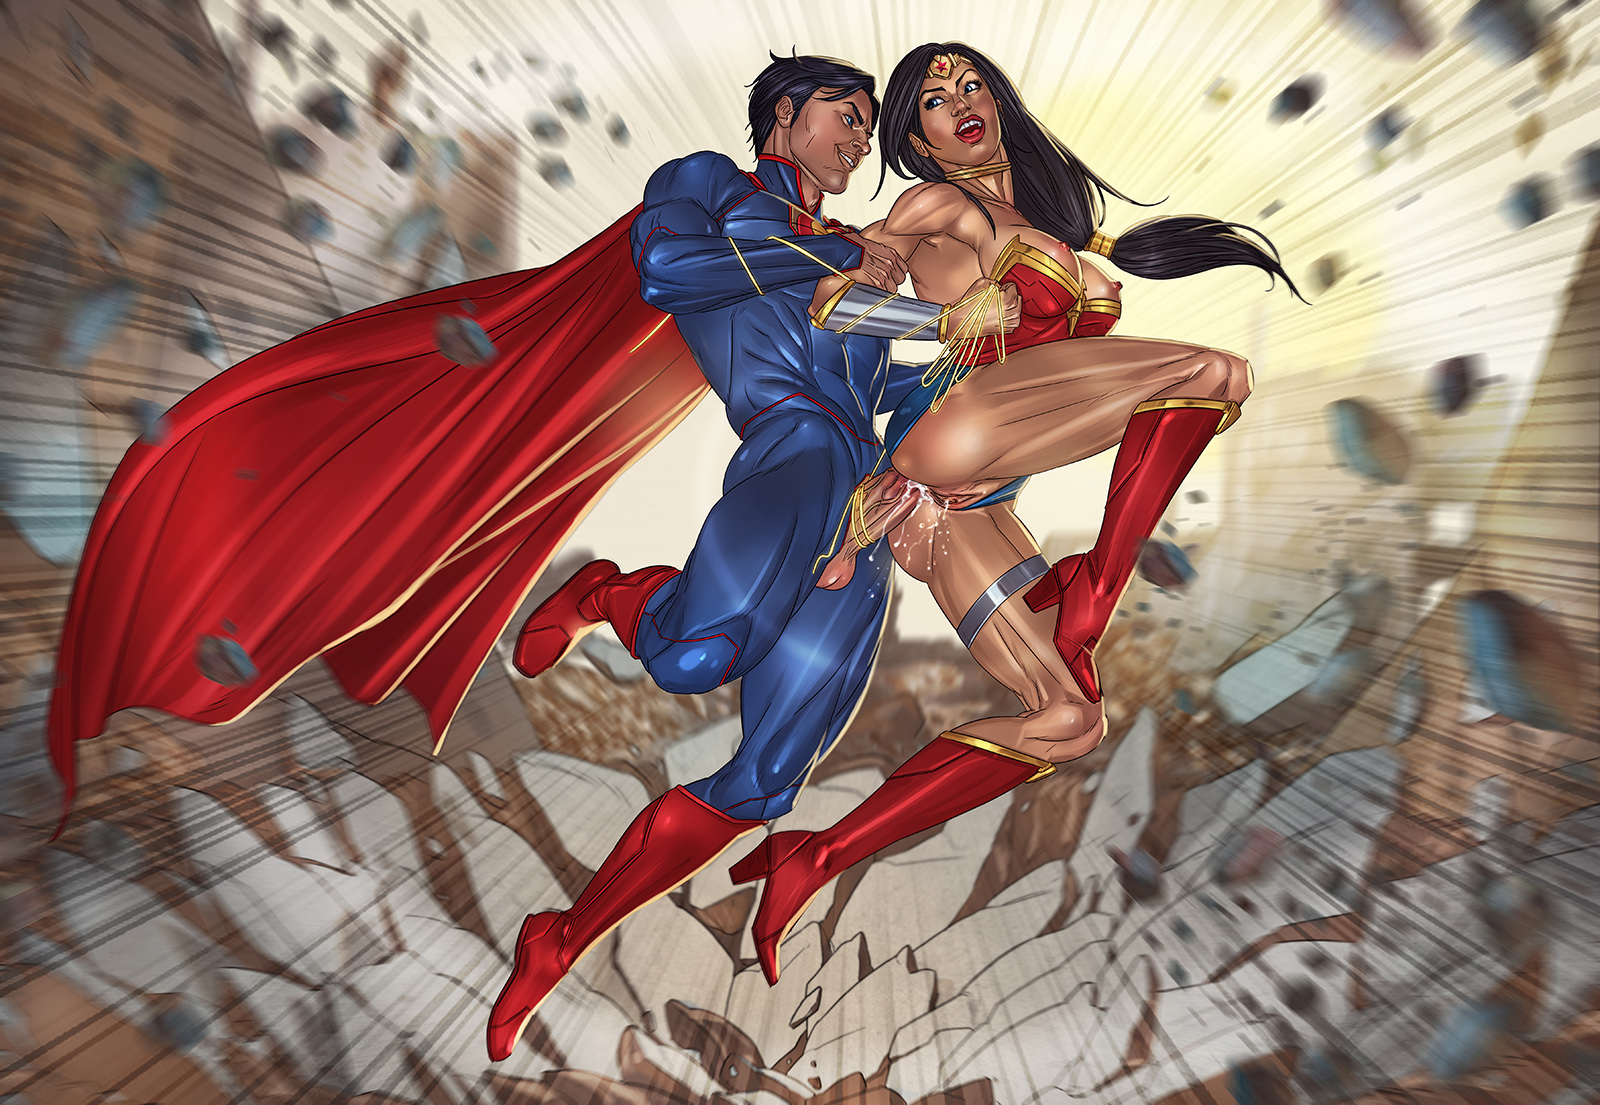 Wonder woman makes you suck superman's dick at a party